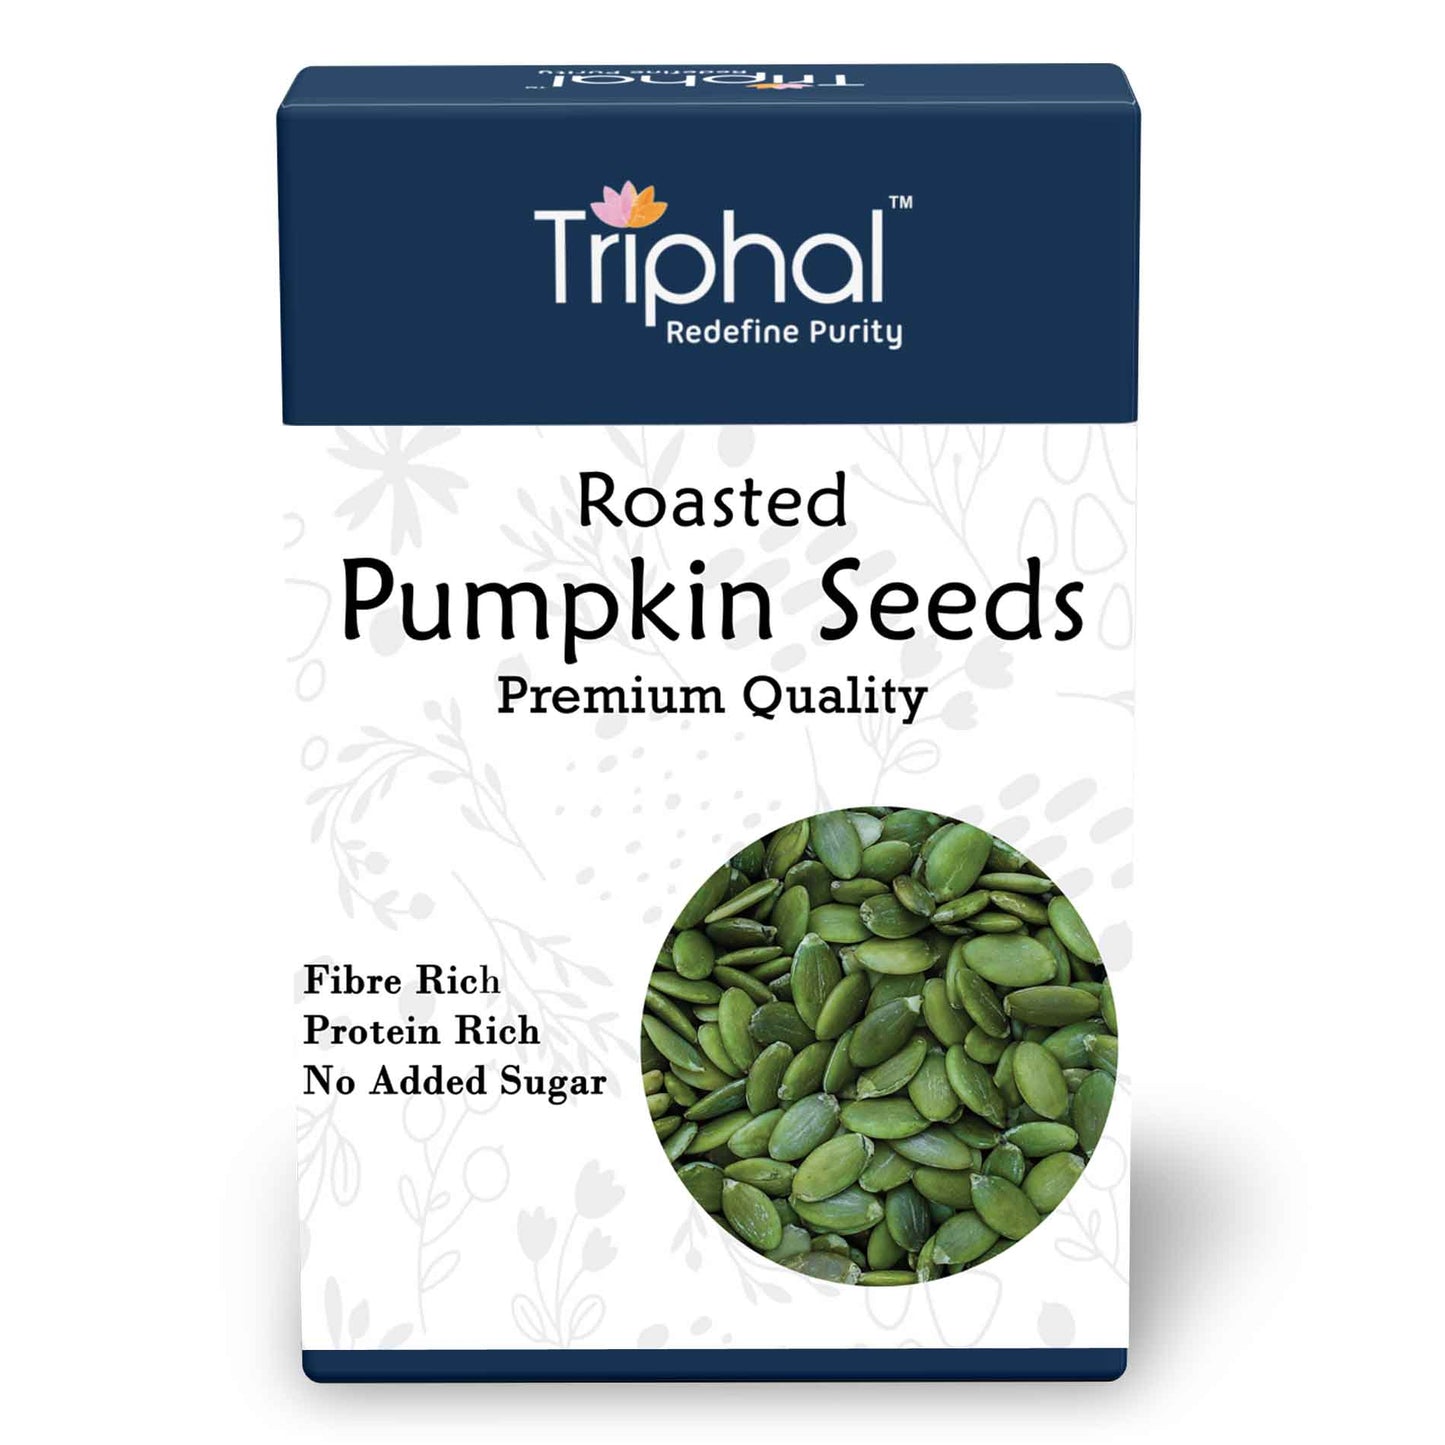 Triphal's Roasted Pumpkin Seeds - A Delicious and Nutritious Snack for Diet-Conscious Individuals